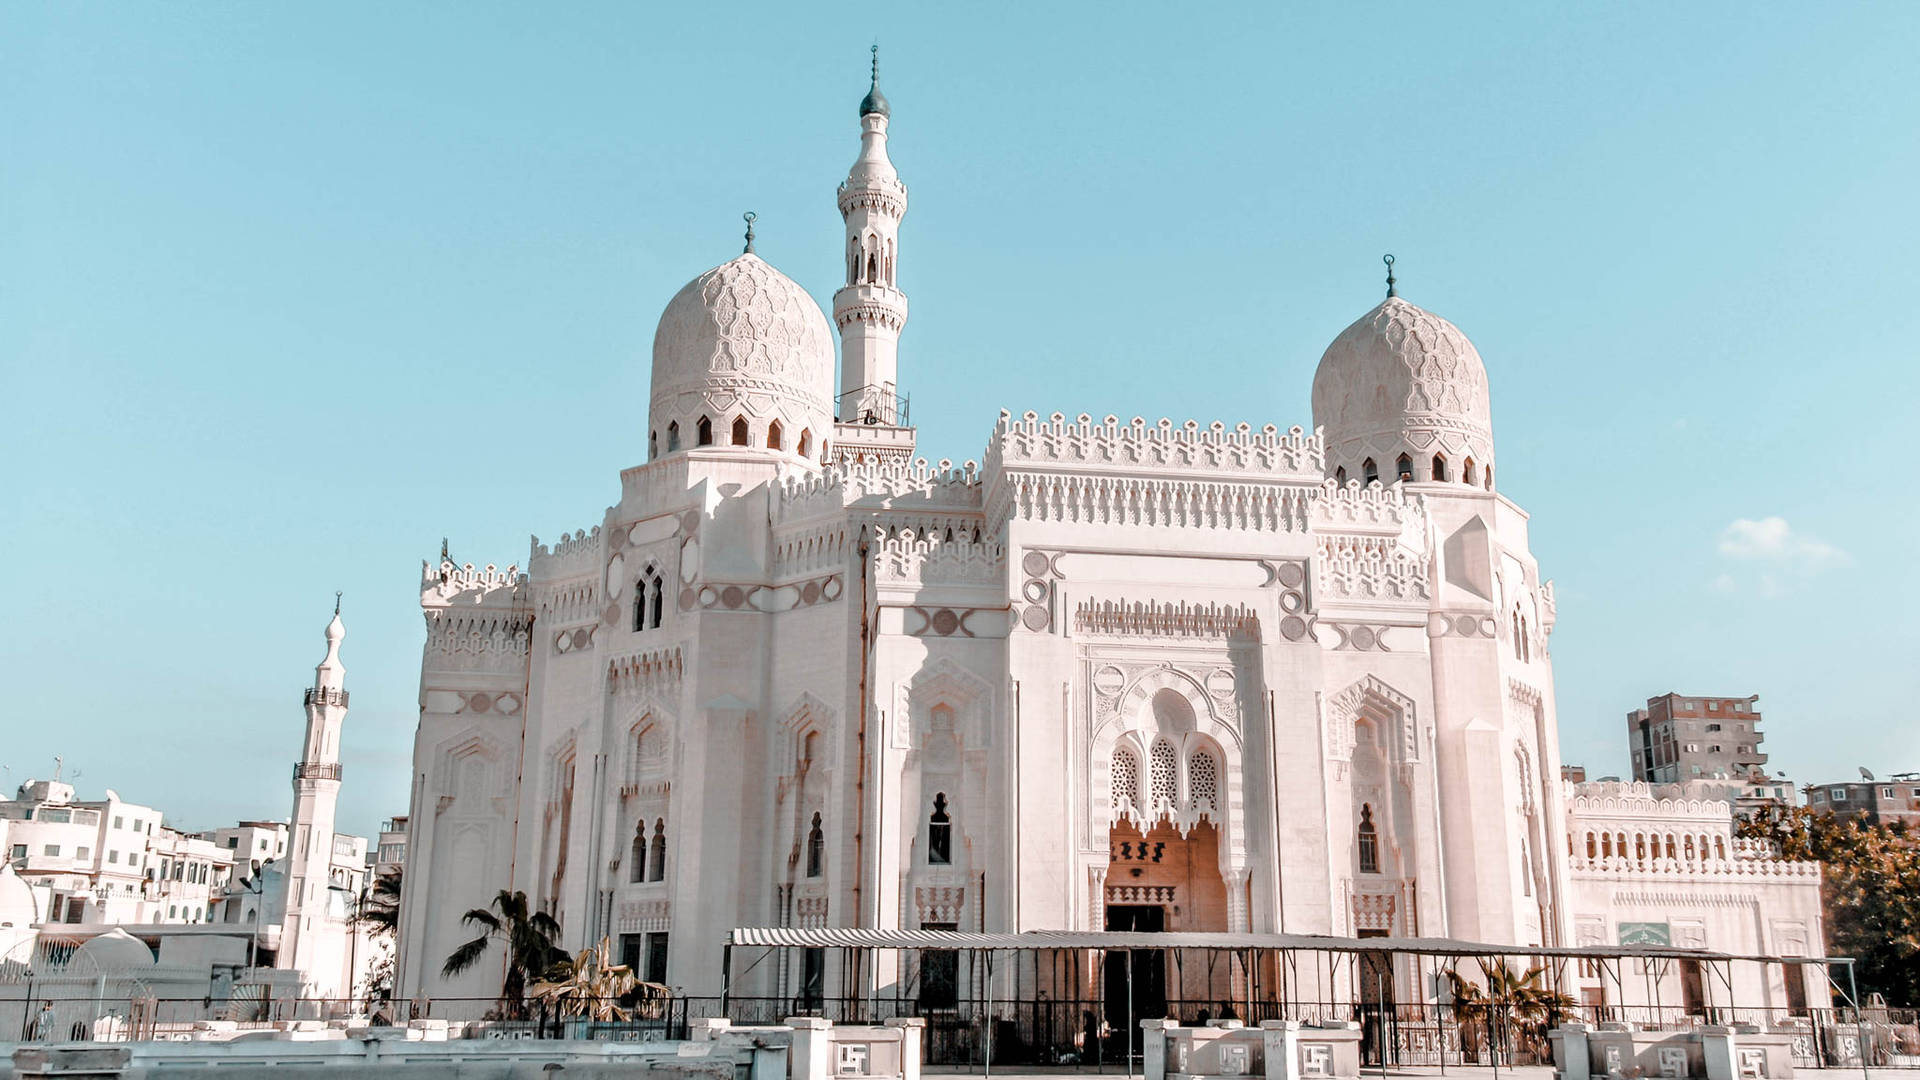 Caption: Captivating View Of Egyptian Mosque In Alexandria